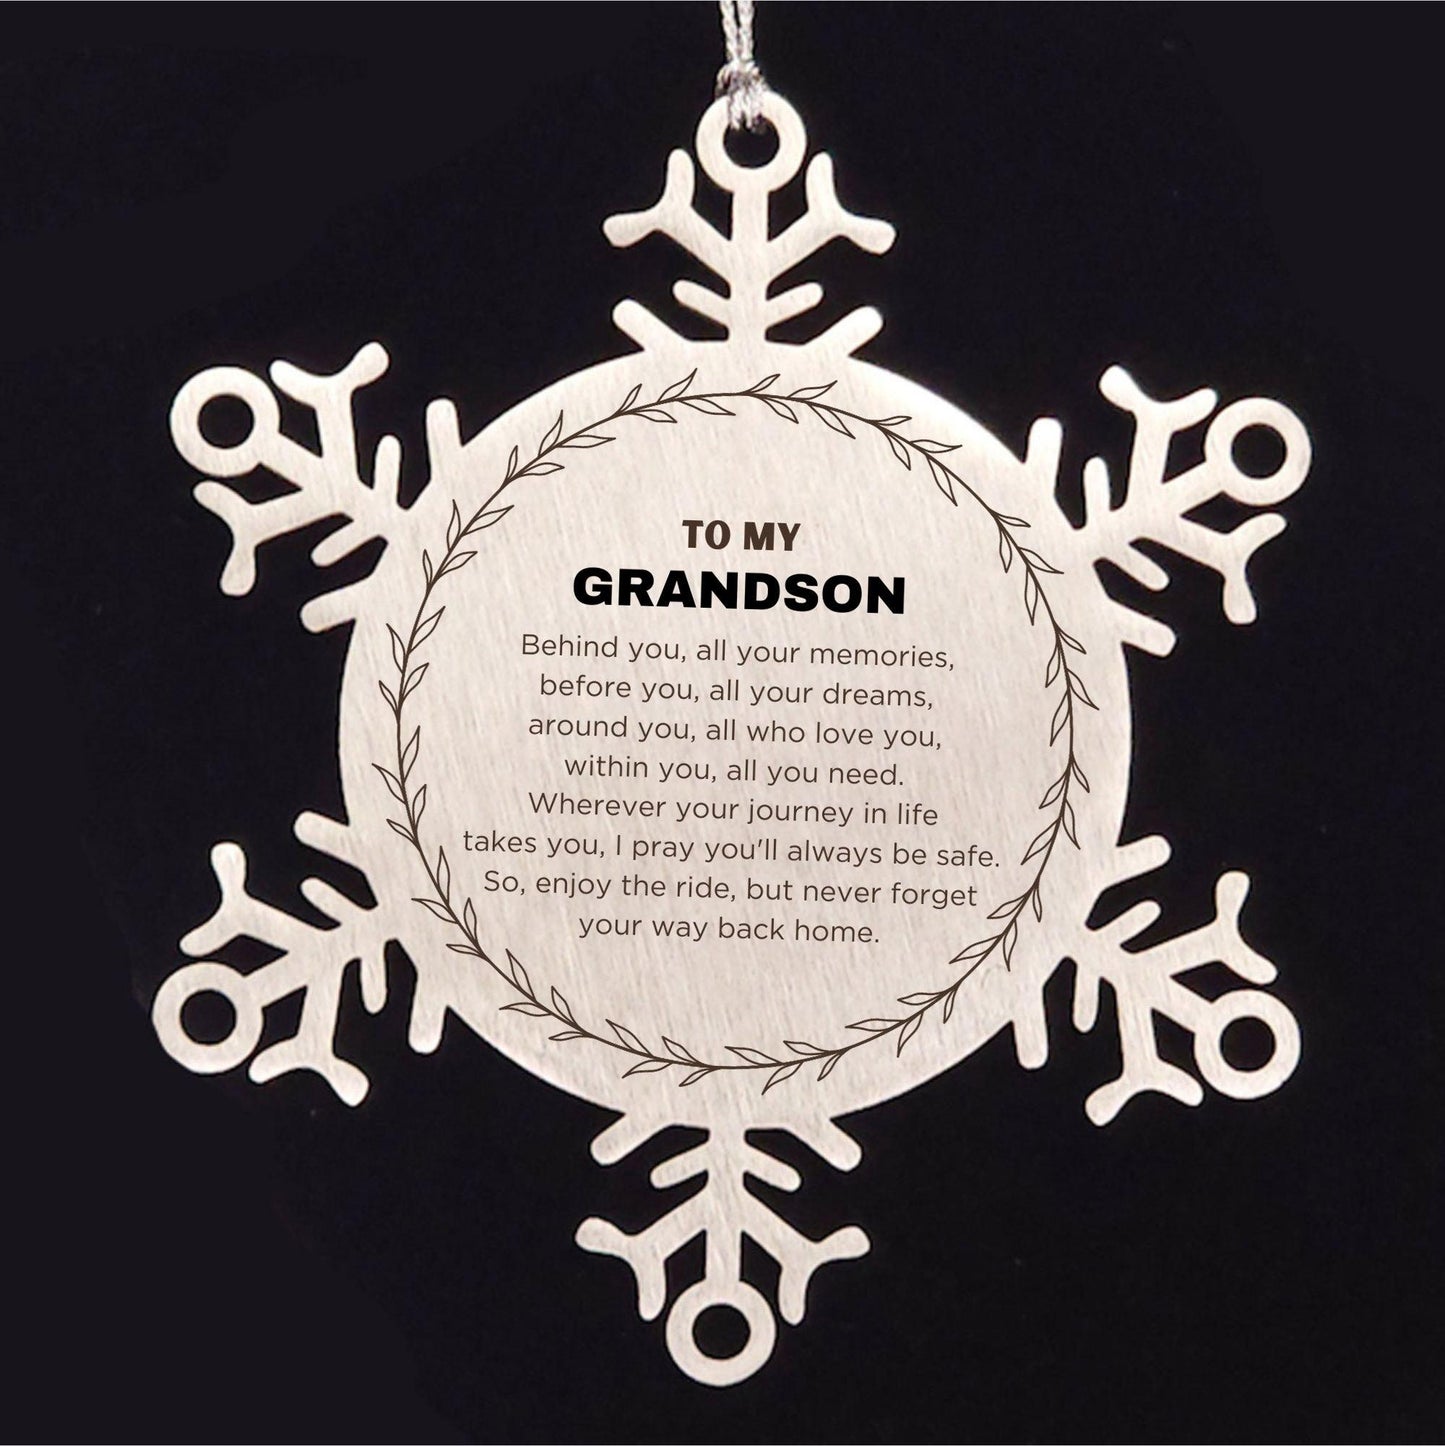 Inspirational Grandson Snowflake Stainless Steel Ornament - Behind you, all your Memories, Before you, all your Dreams - Birthday, Christmas Holiday Gifts - Mallard Moon Gift Shop